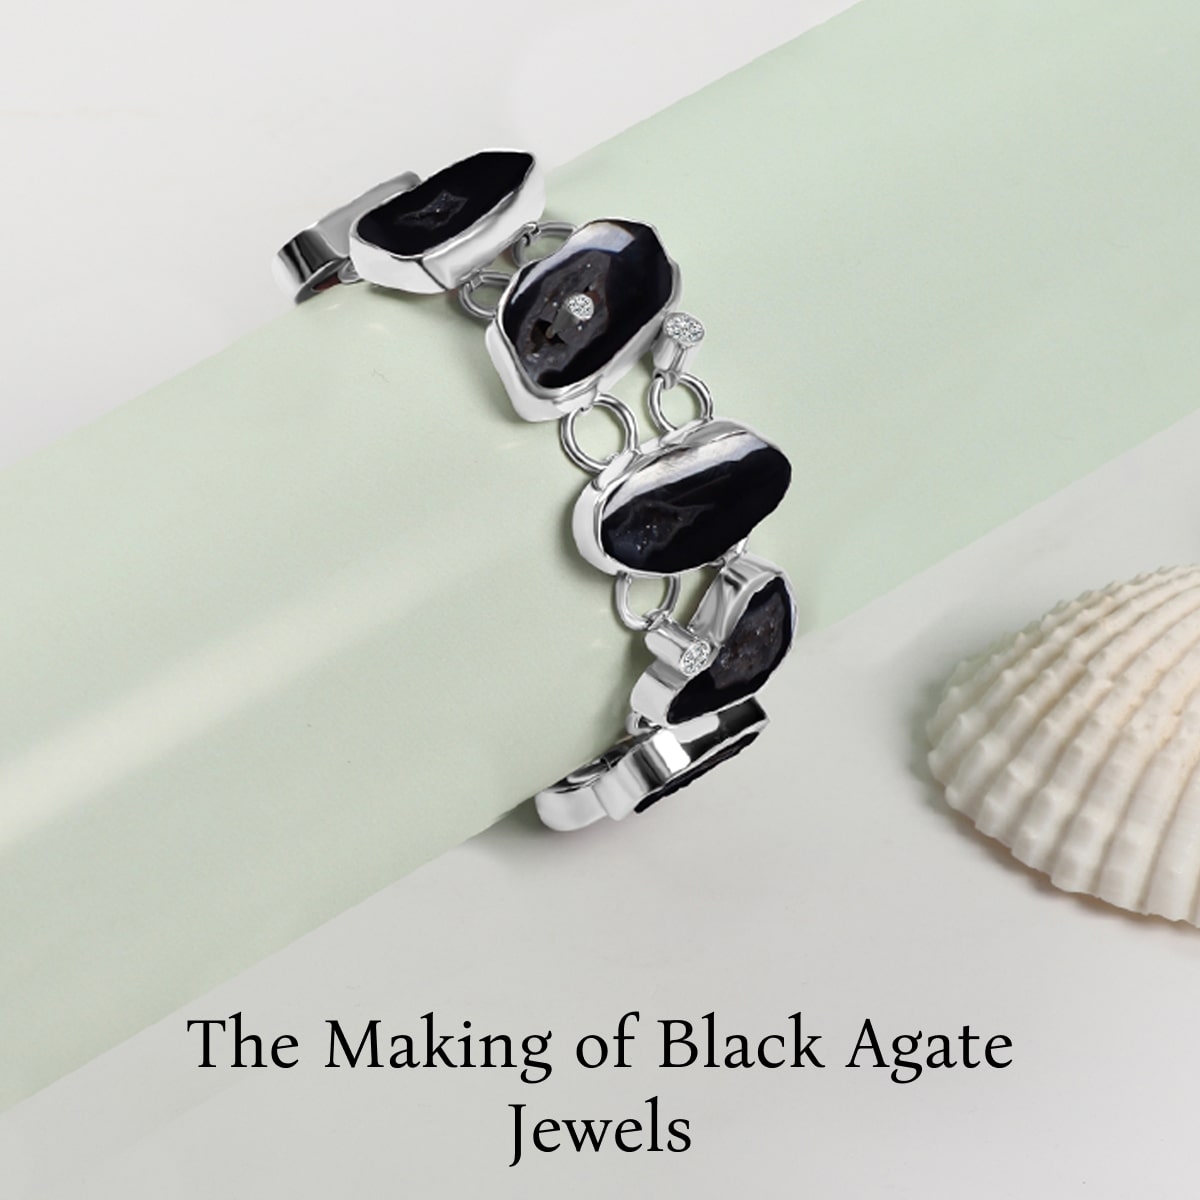 The Formation Process of Black Agate Jewel